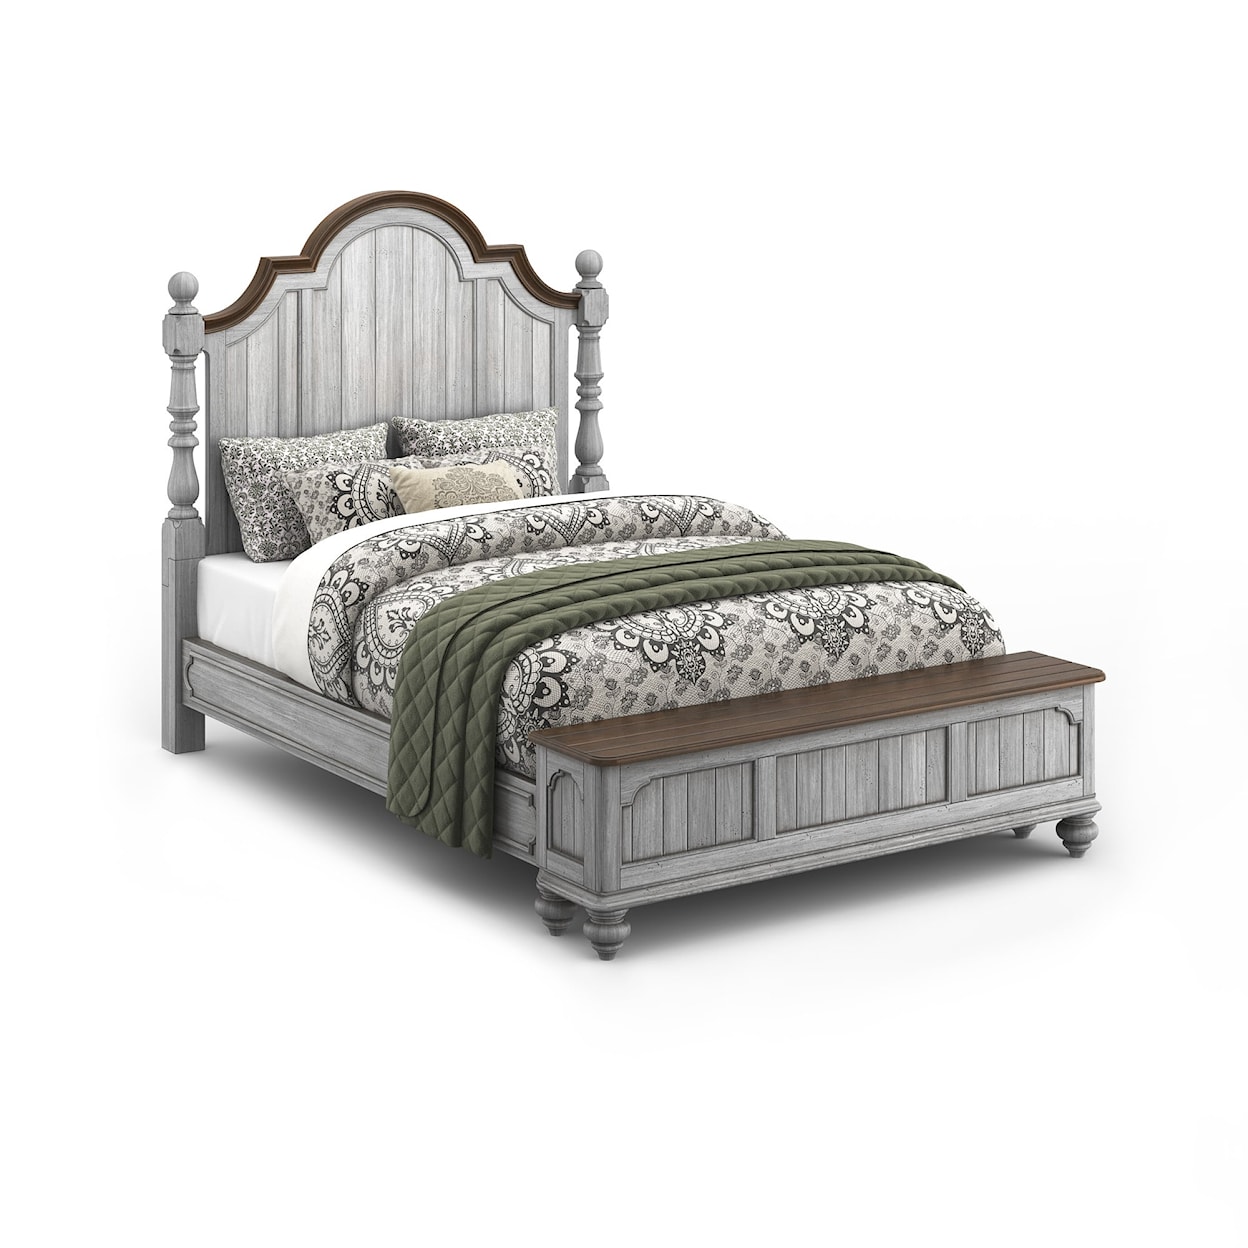 Flexsteel Wynwood Collection Plymouth King Poster Storage Bed